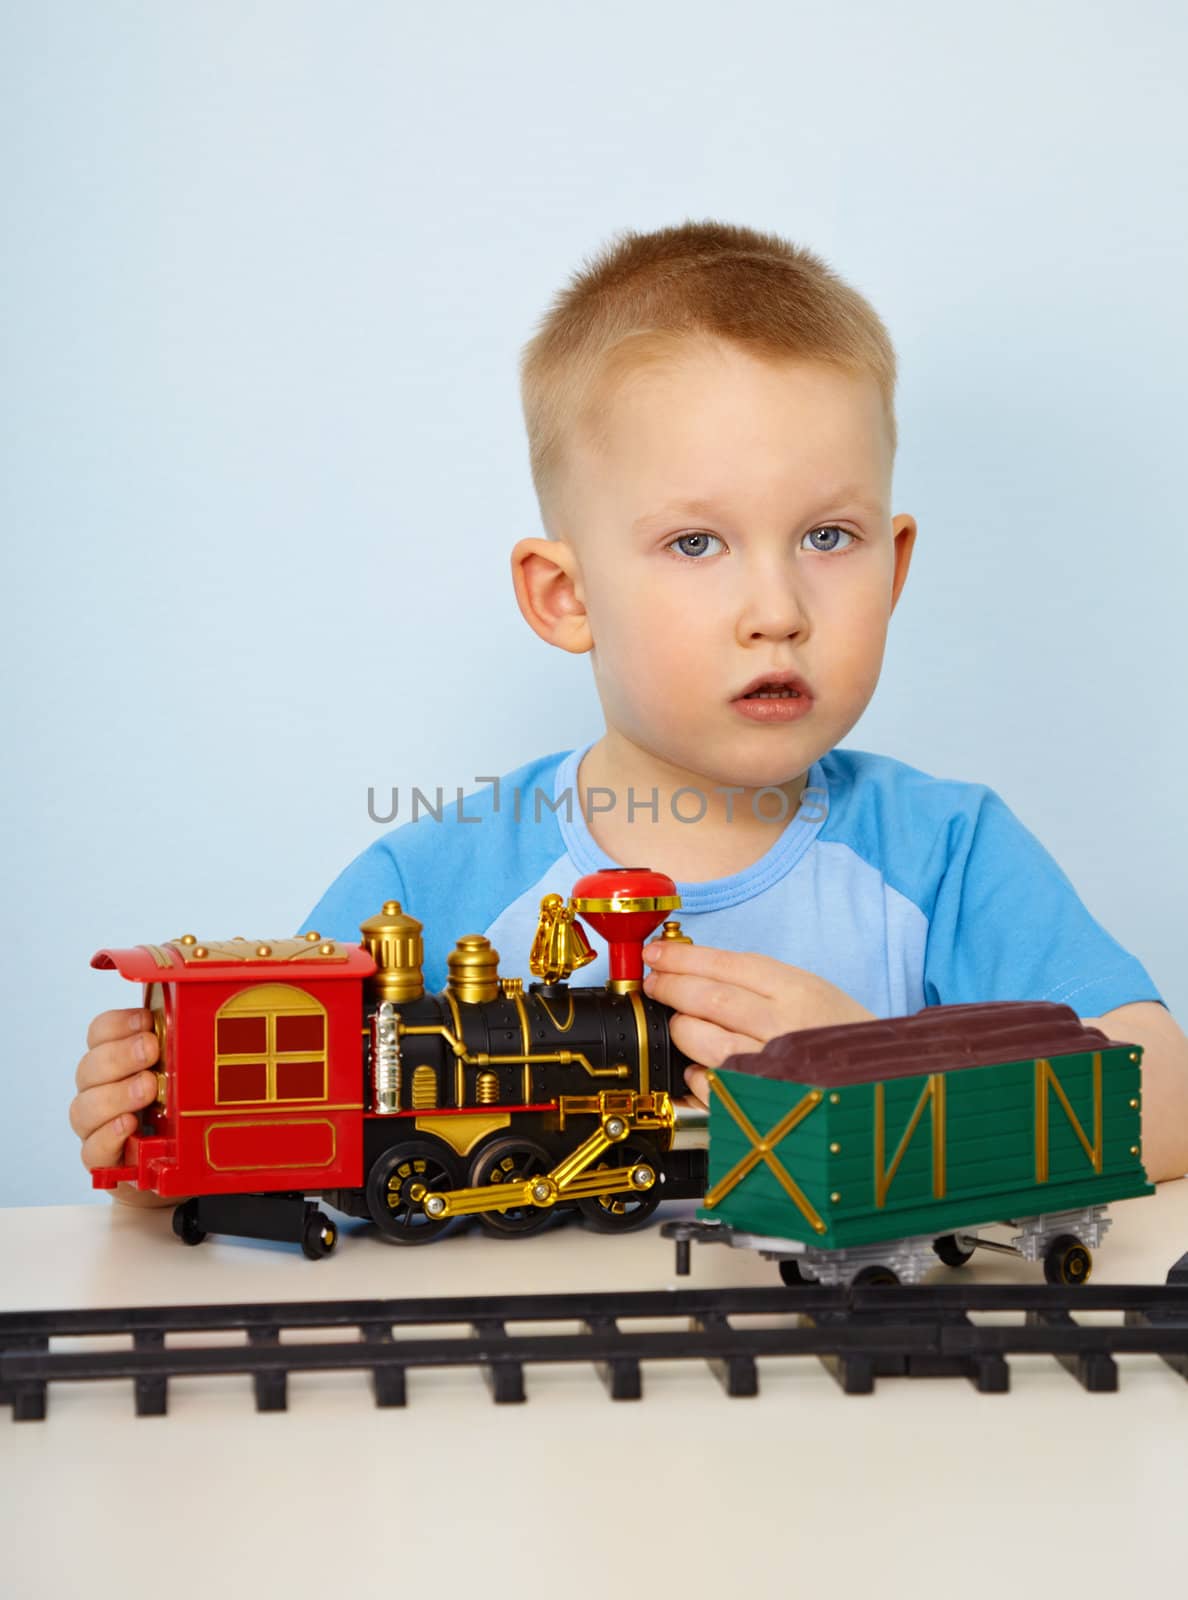 Little boy playing with a plastic toy locomotive on blue